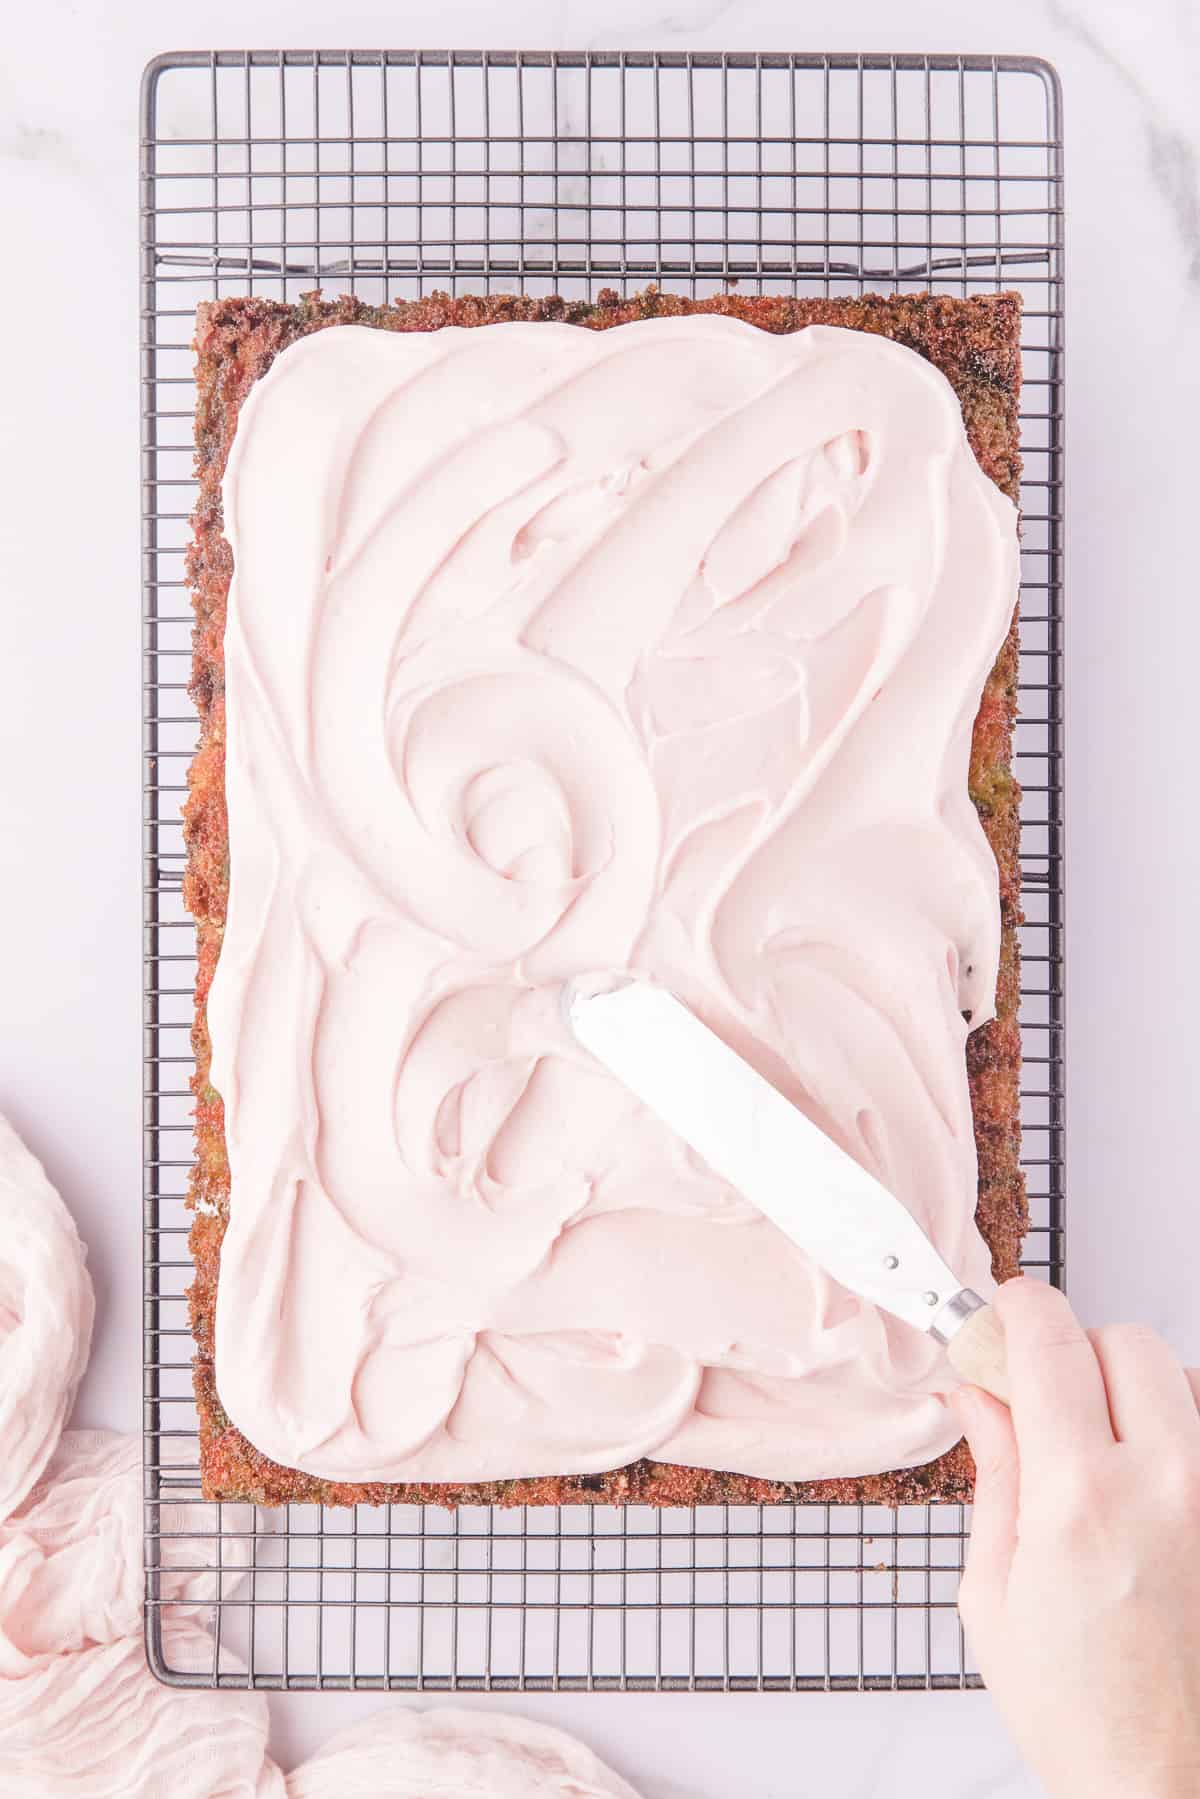 Hand using an offset spatula to swirl frosting over the cake on a wire rack. 